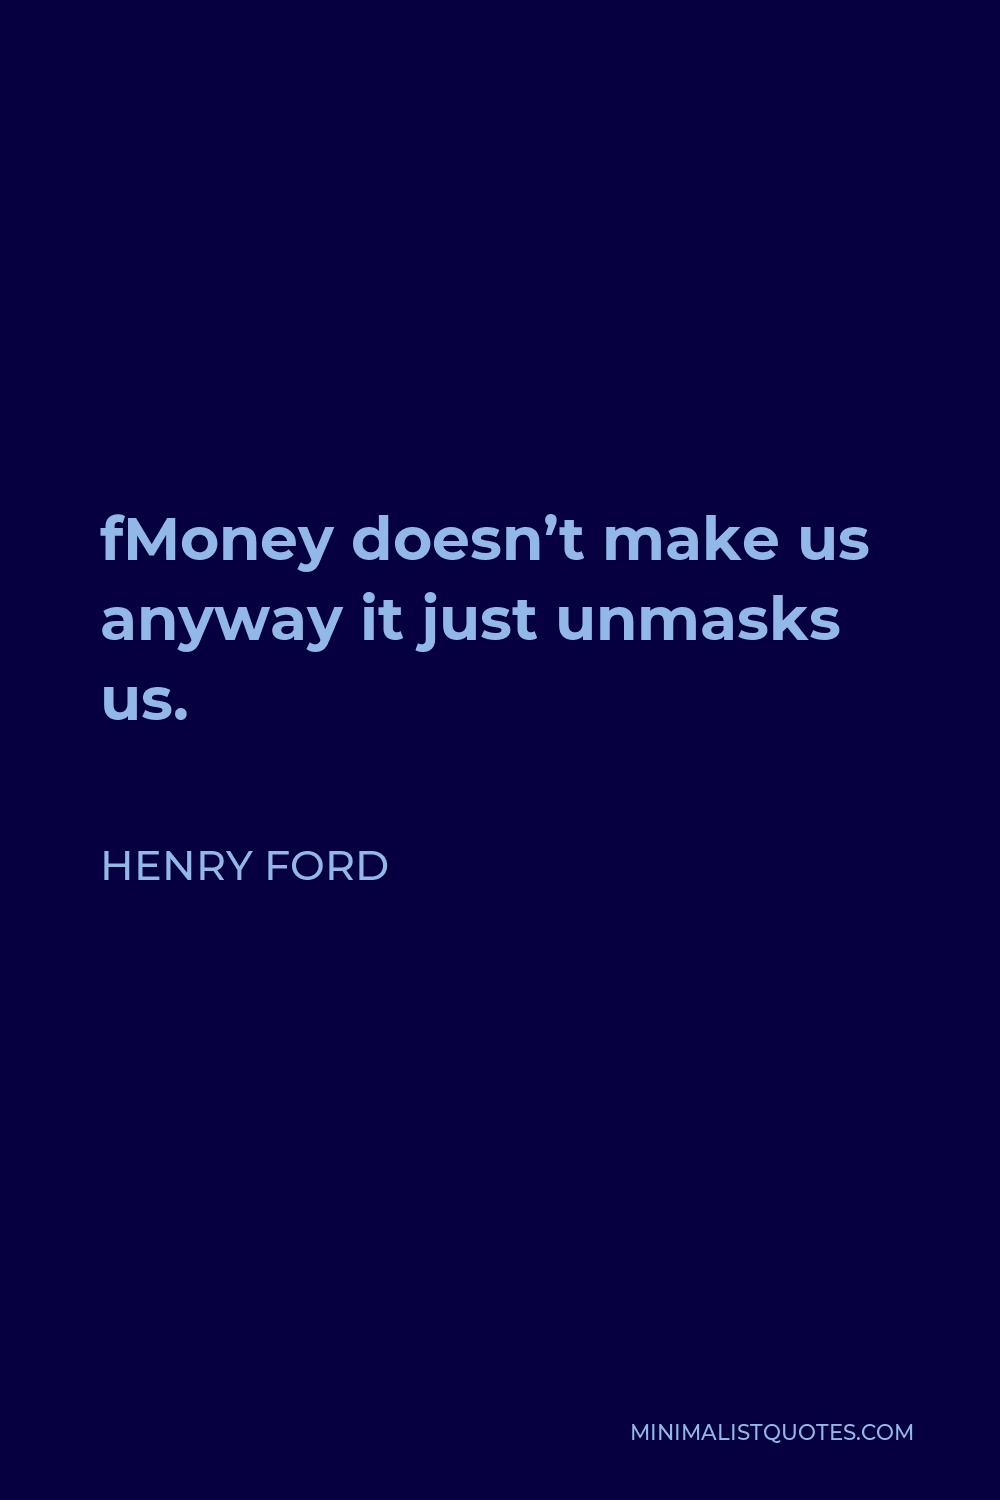 Henry Ford Quote - fMoney doesn’t make us anyway it just unmasks us.